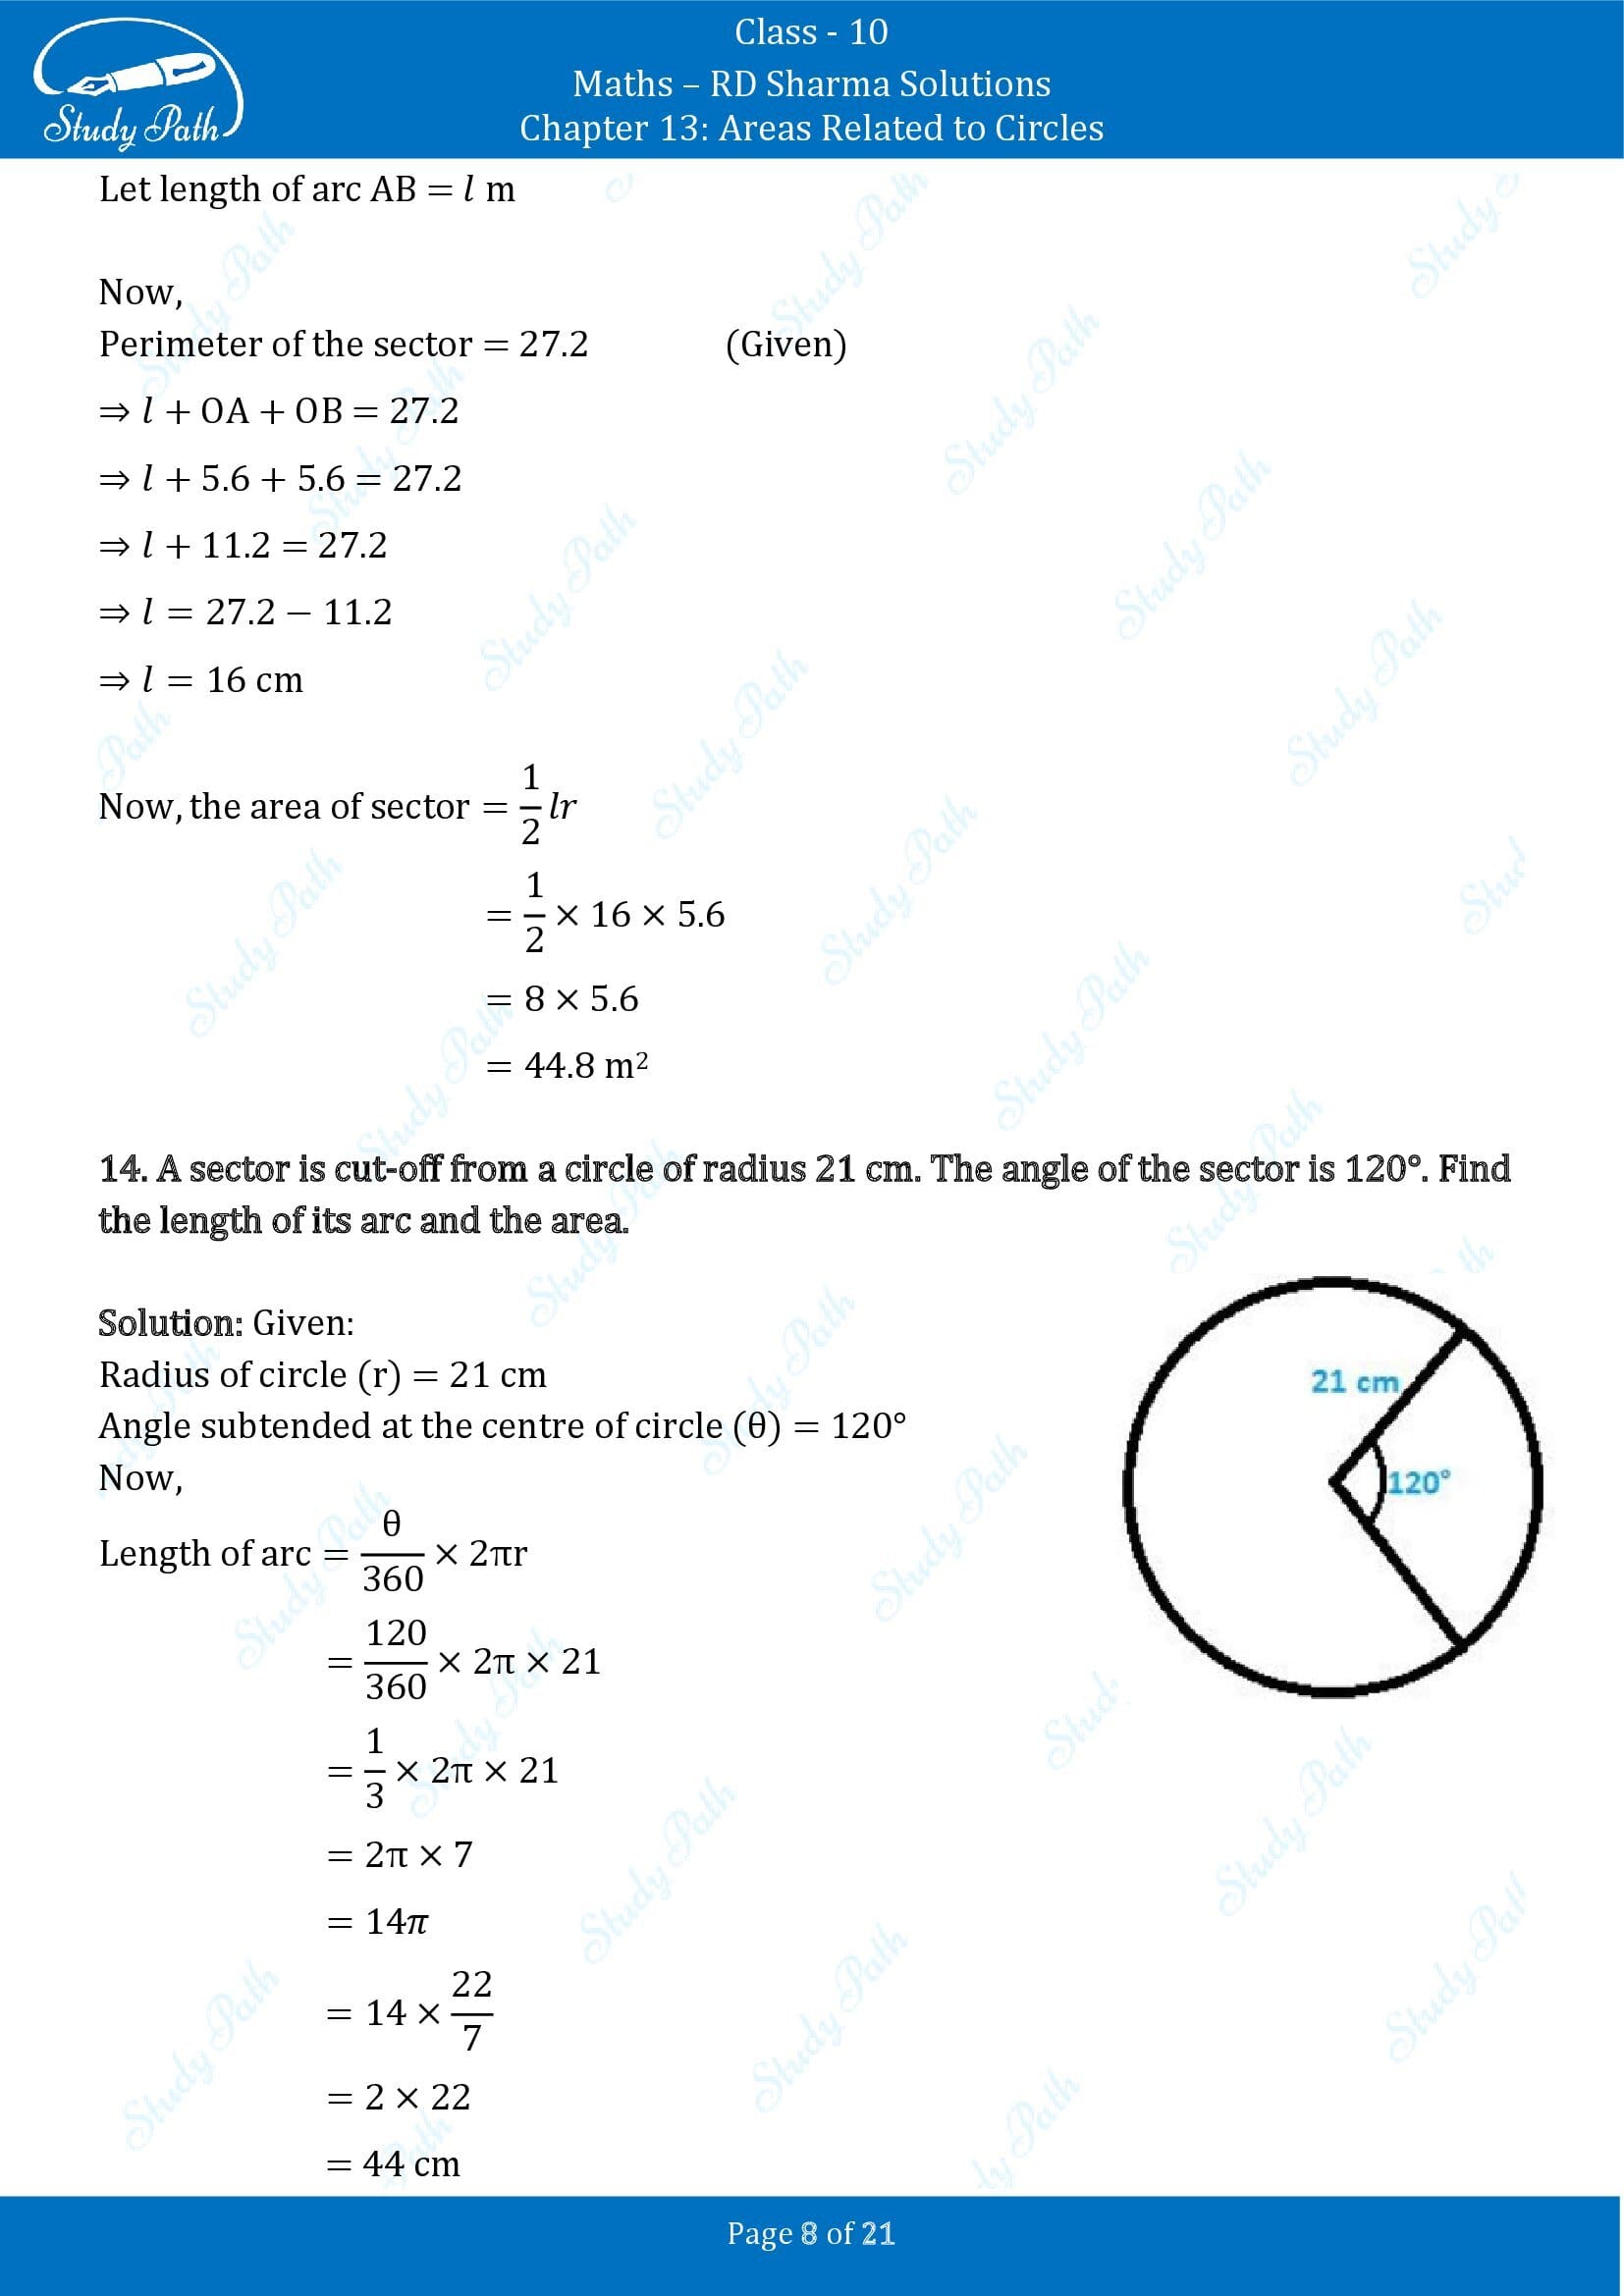 RD Sharma Solutions Class 10 Chapter 13 Areas Related to Circles Exercise 13.2 00008